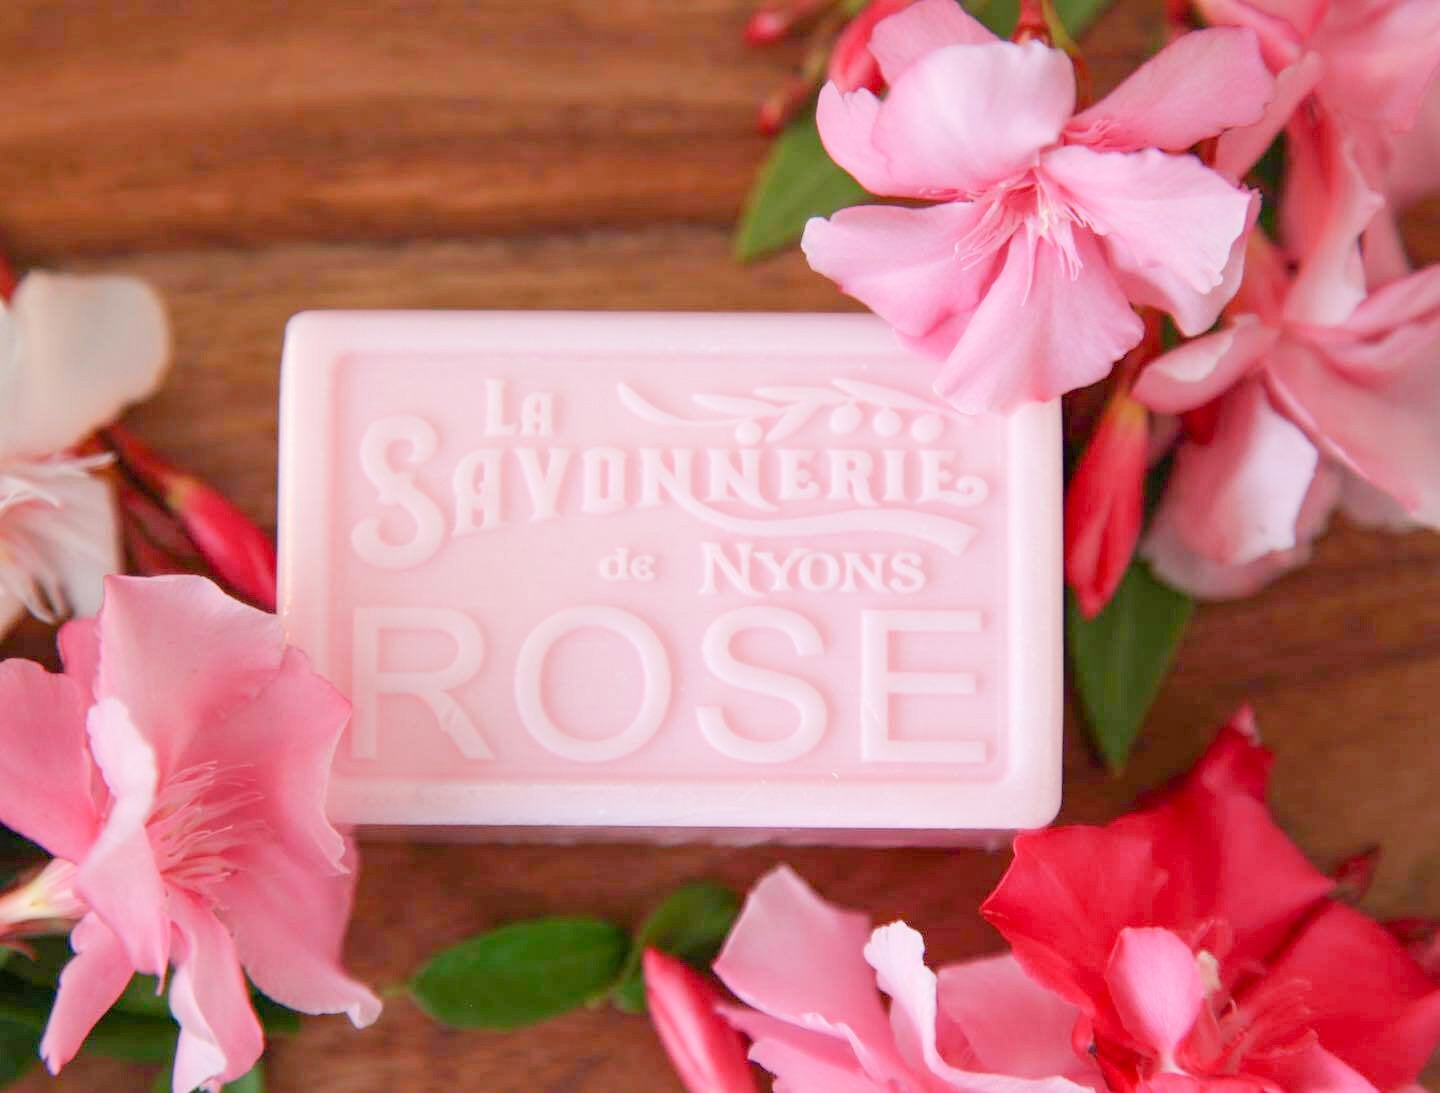 Bar of pink soap that reads La Savonnerie de Nyons Rose surrounded by pink flowers.